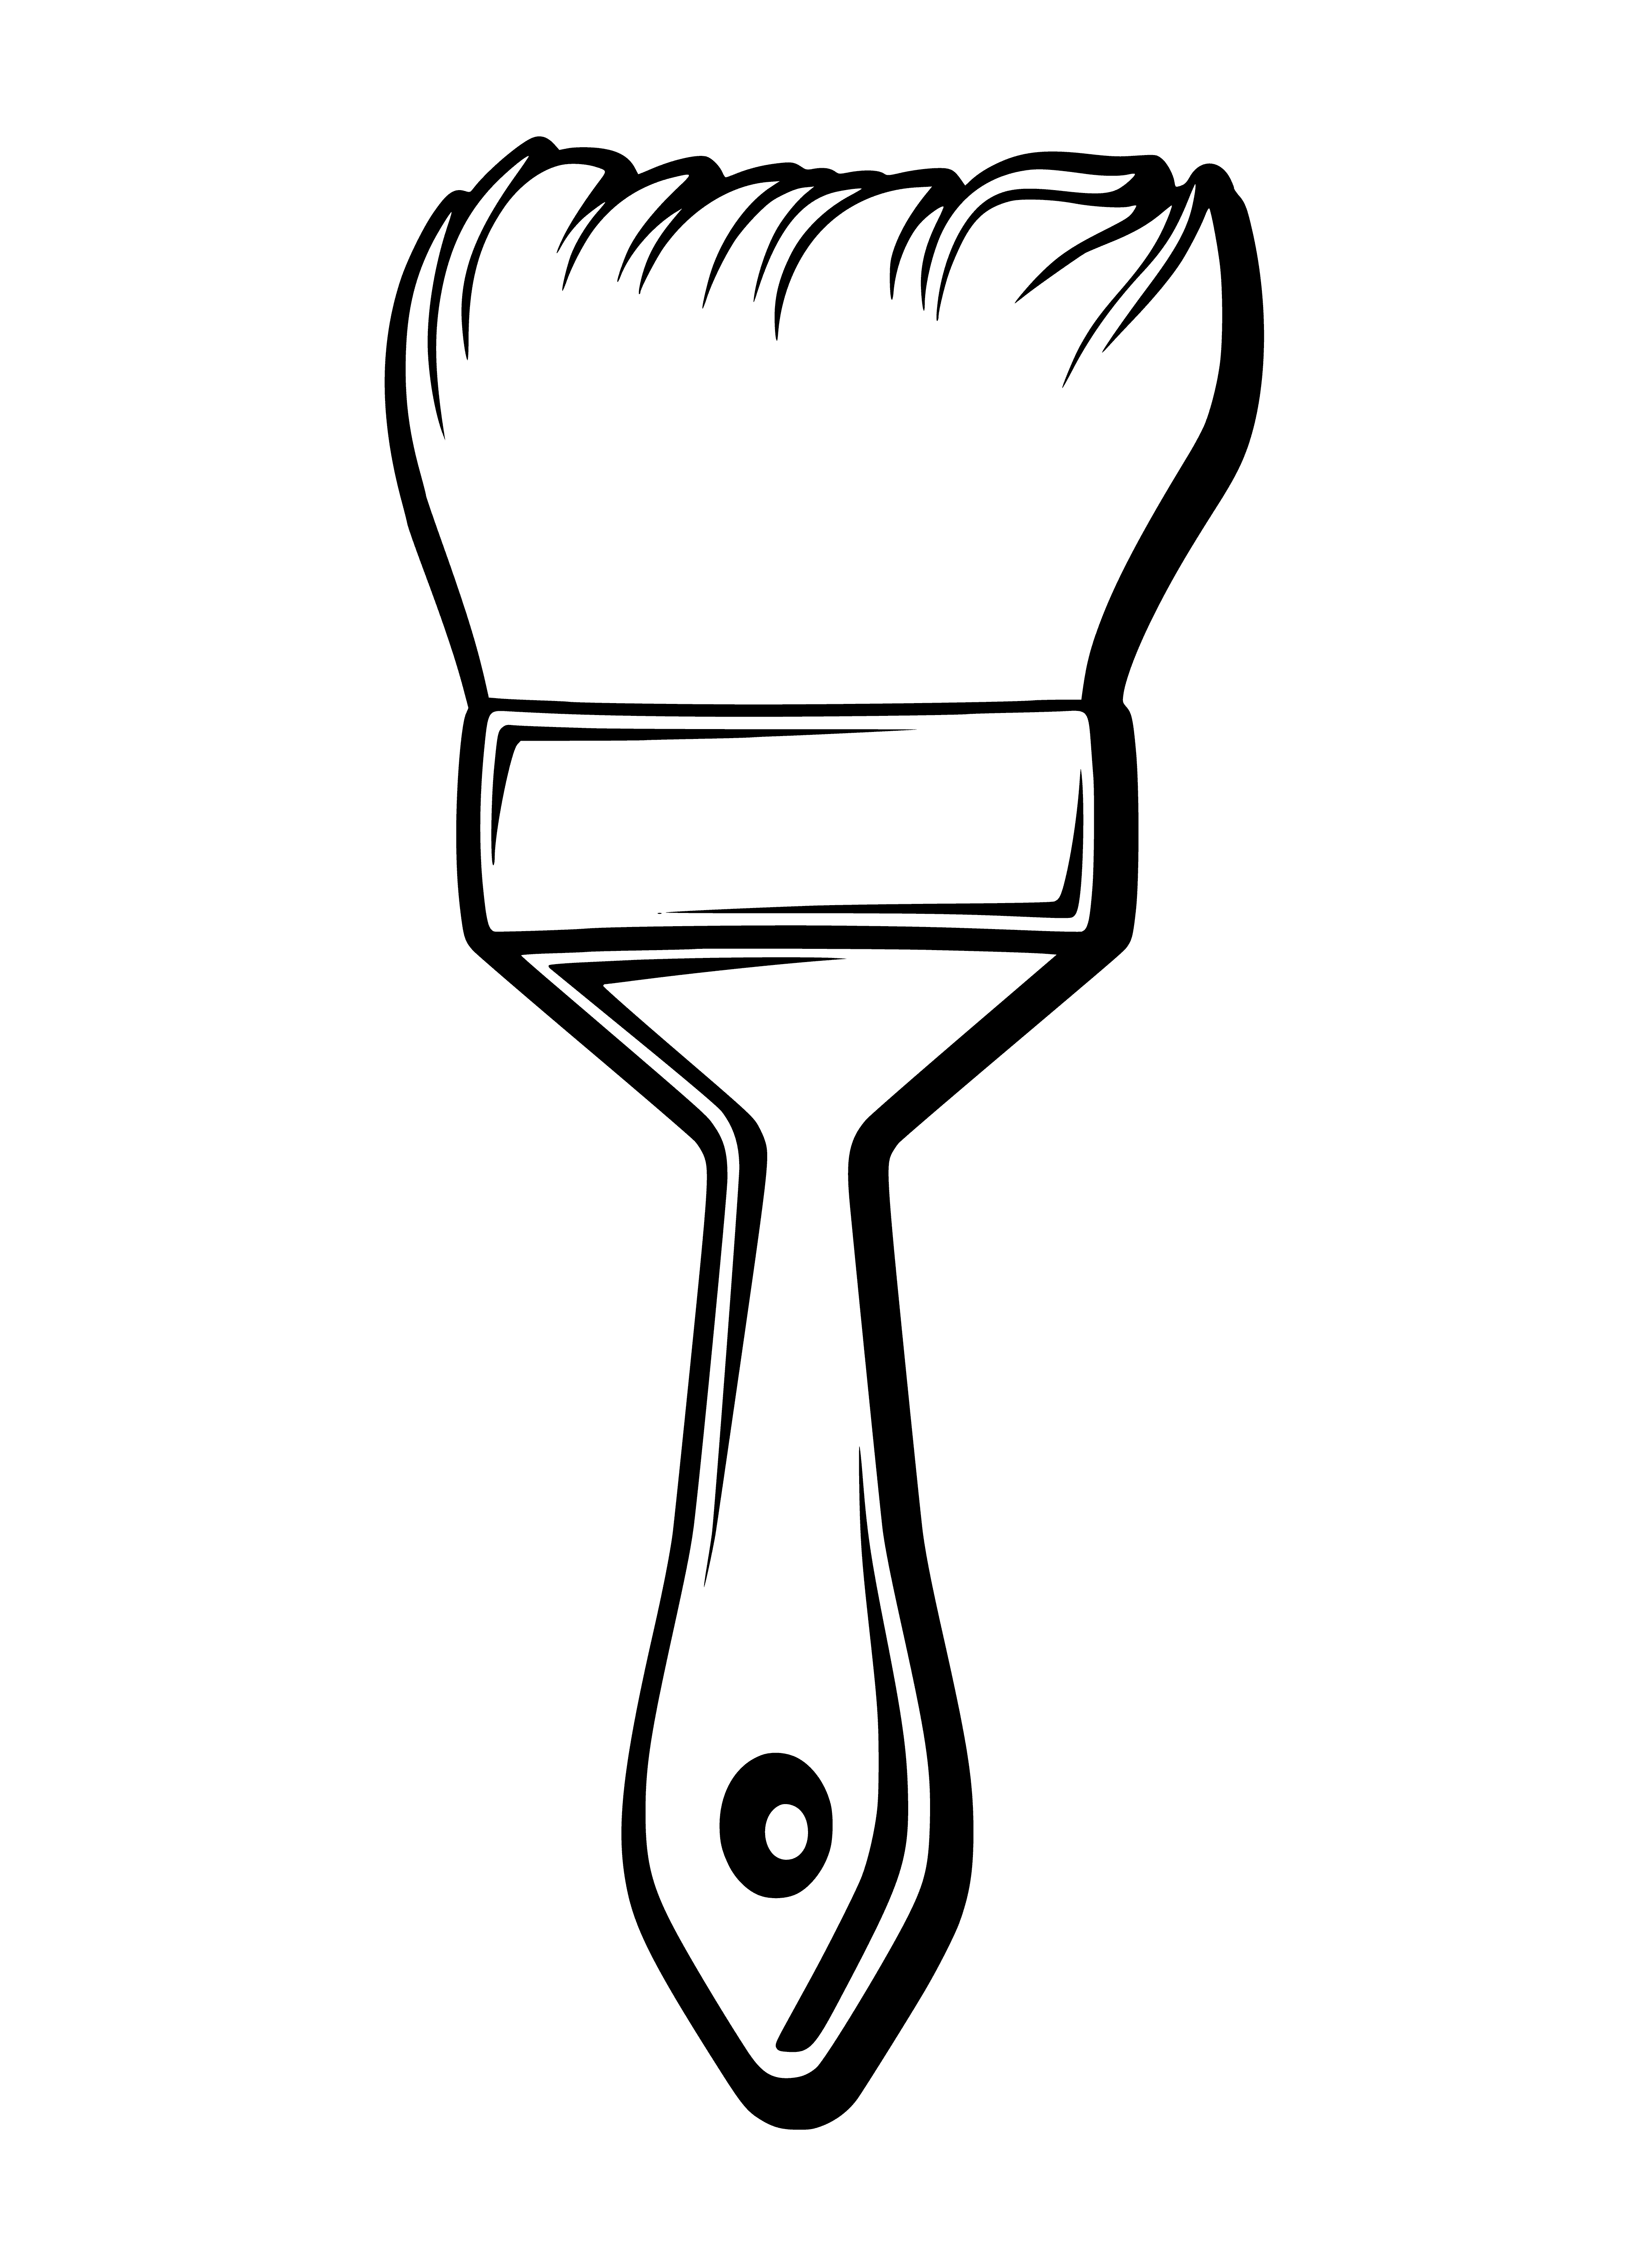 coloring page: Coloring page of a brush with nylon bristles, wooden handle and silver ferrule. #coloring #brush